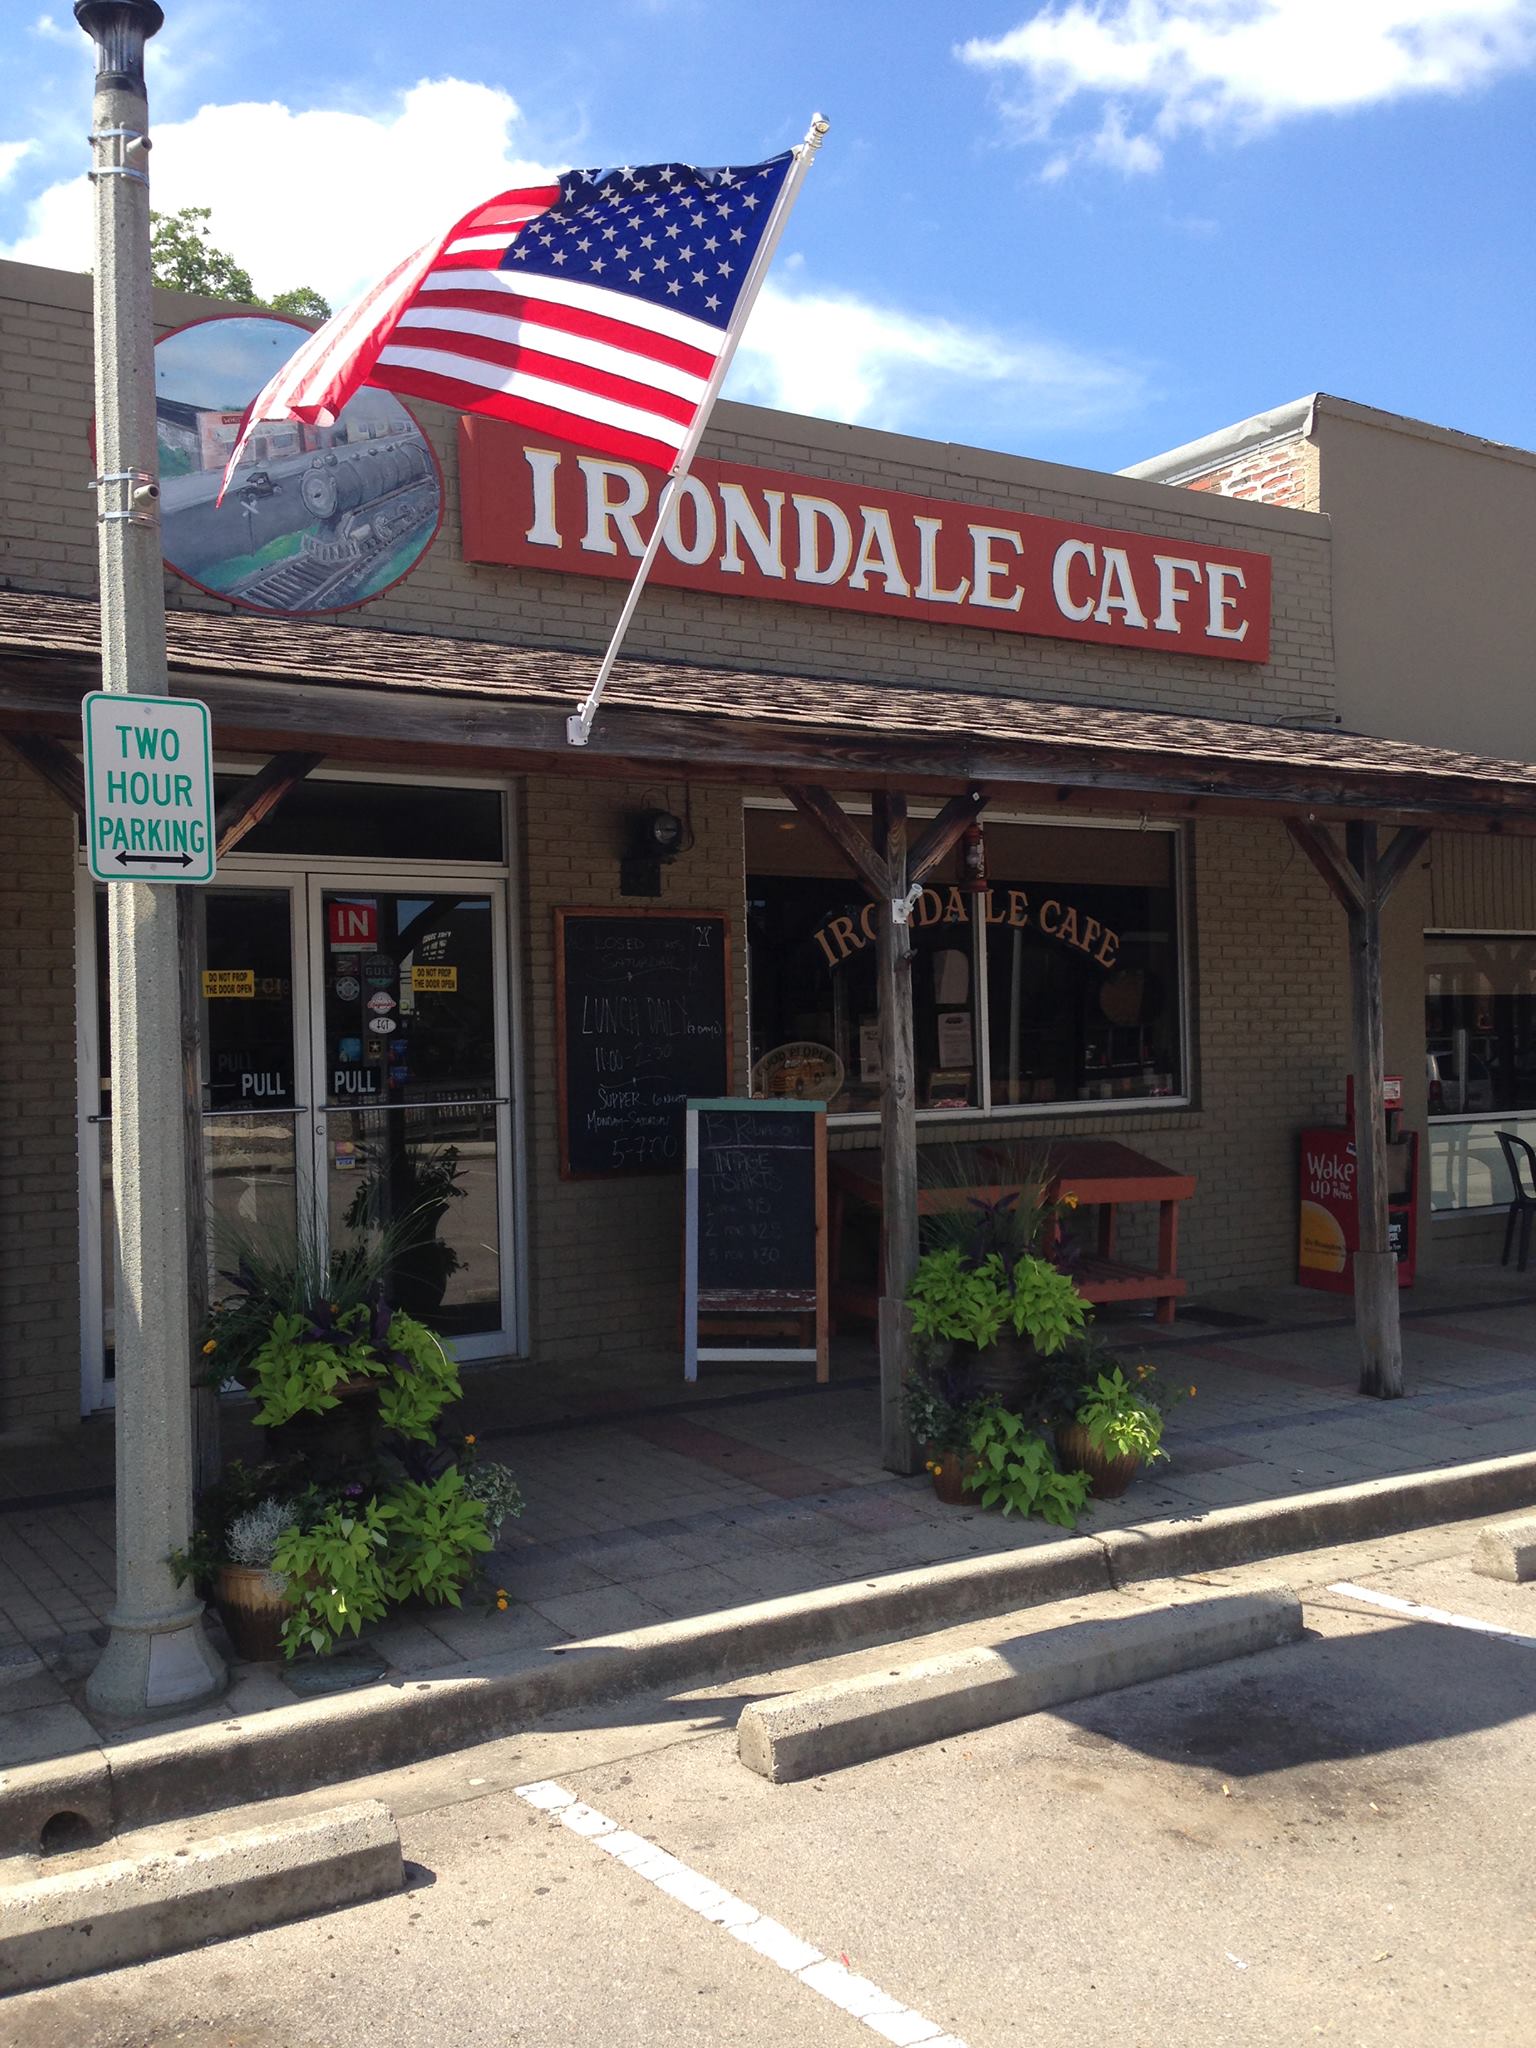 Irondale Cafe Tomato-tomato, 11 local businesses dishing out fried green tomatoes